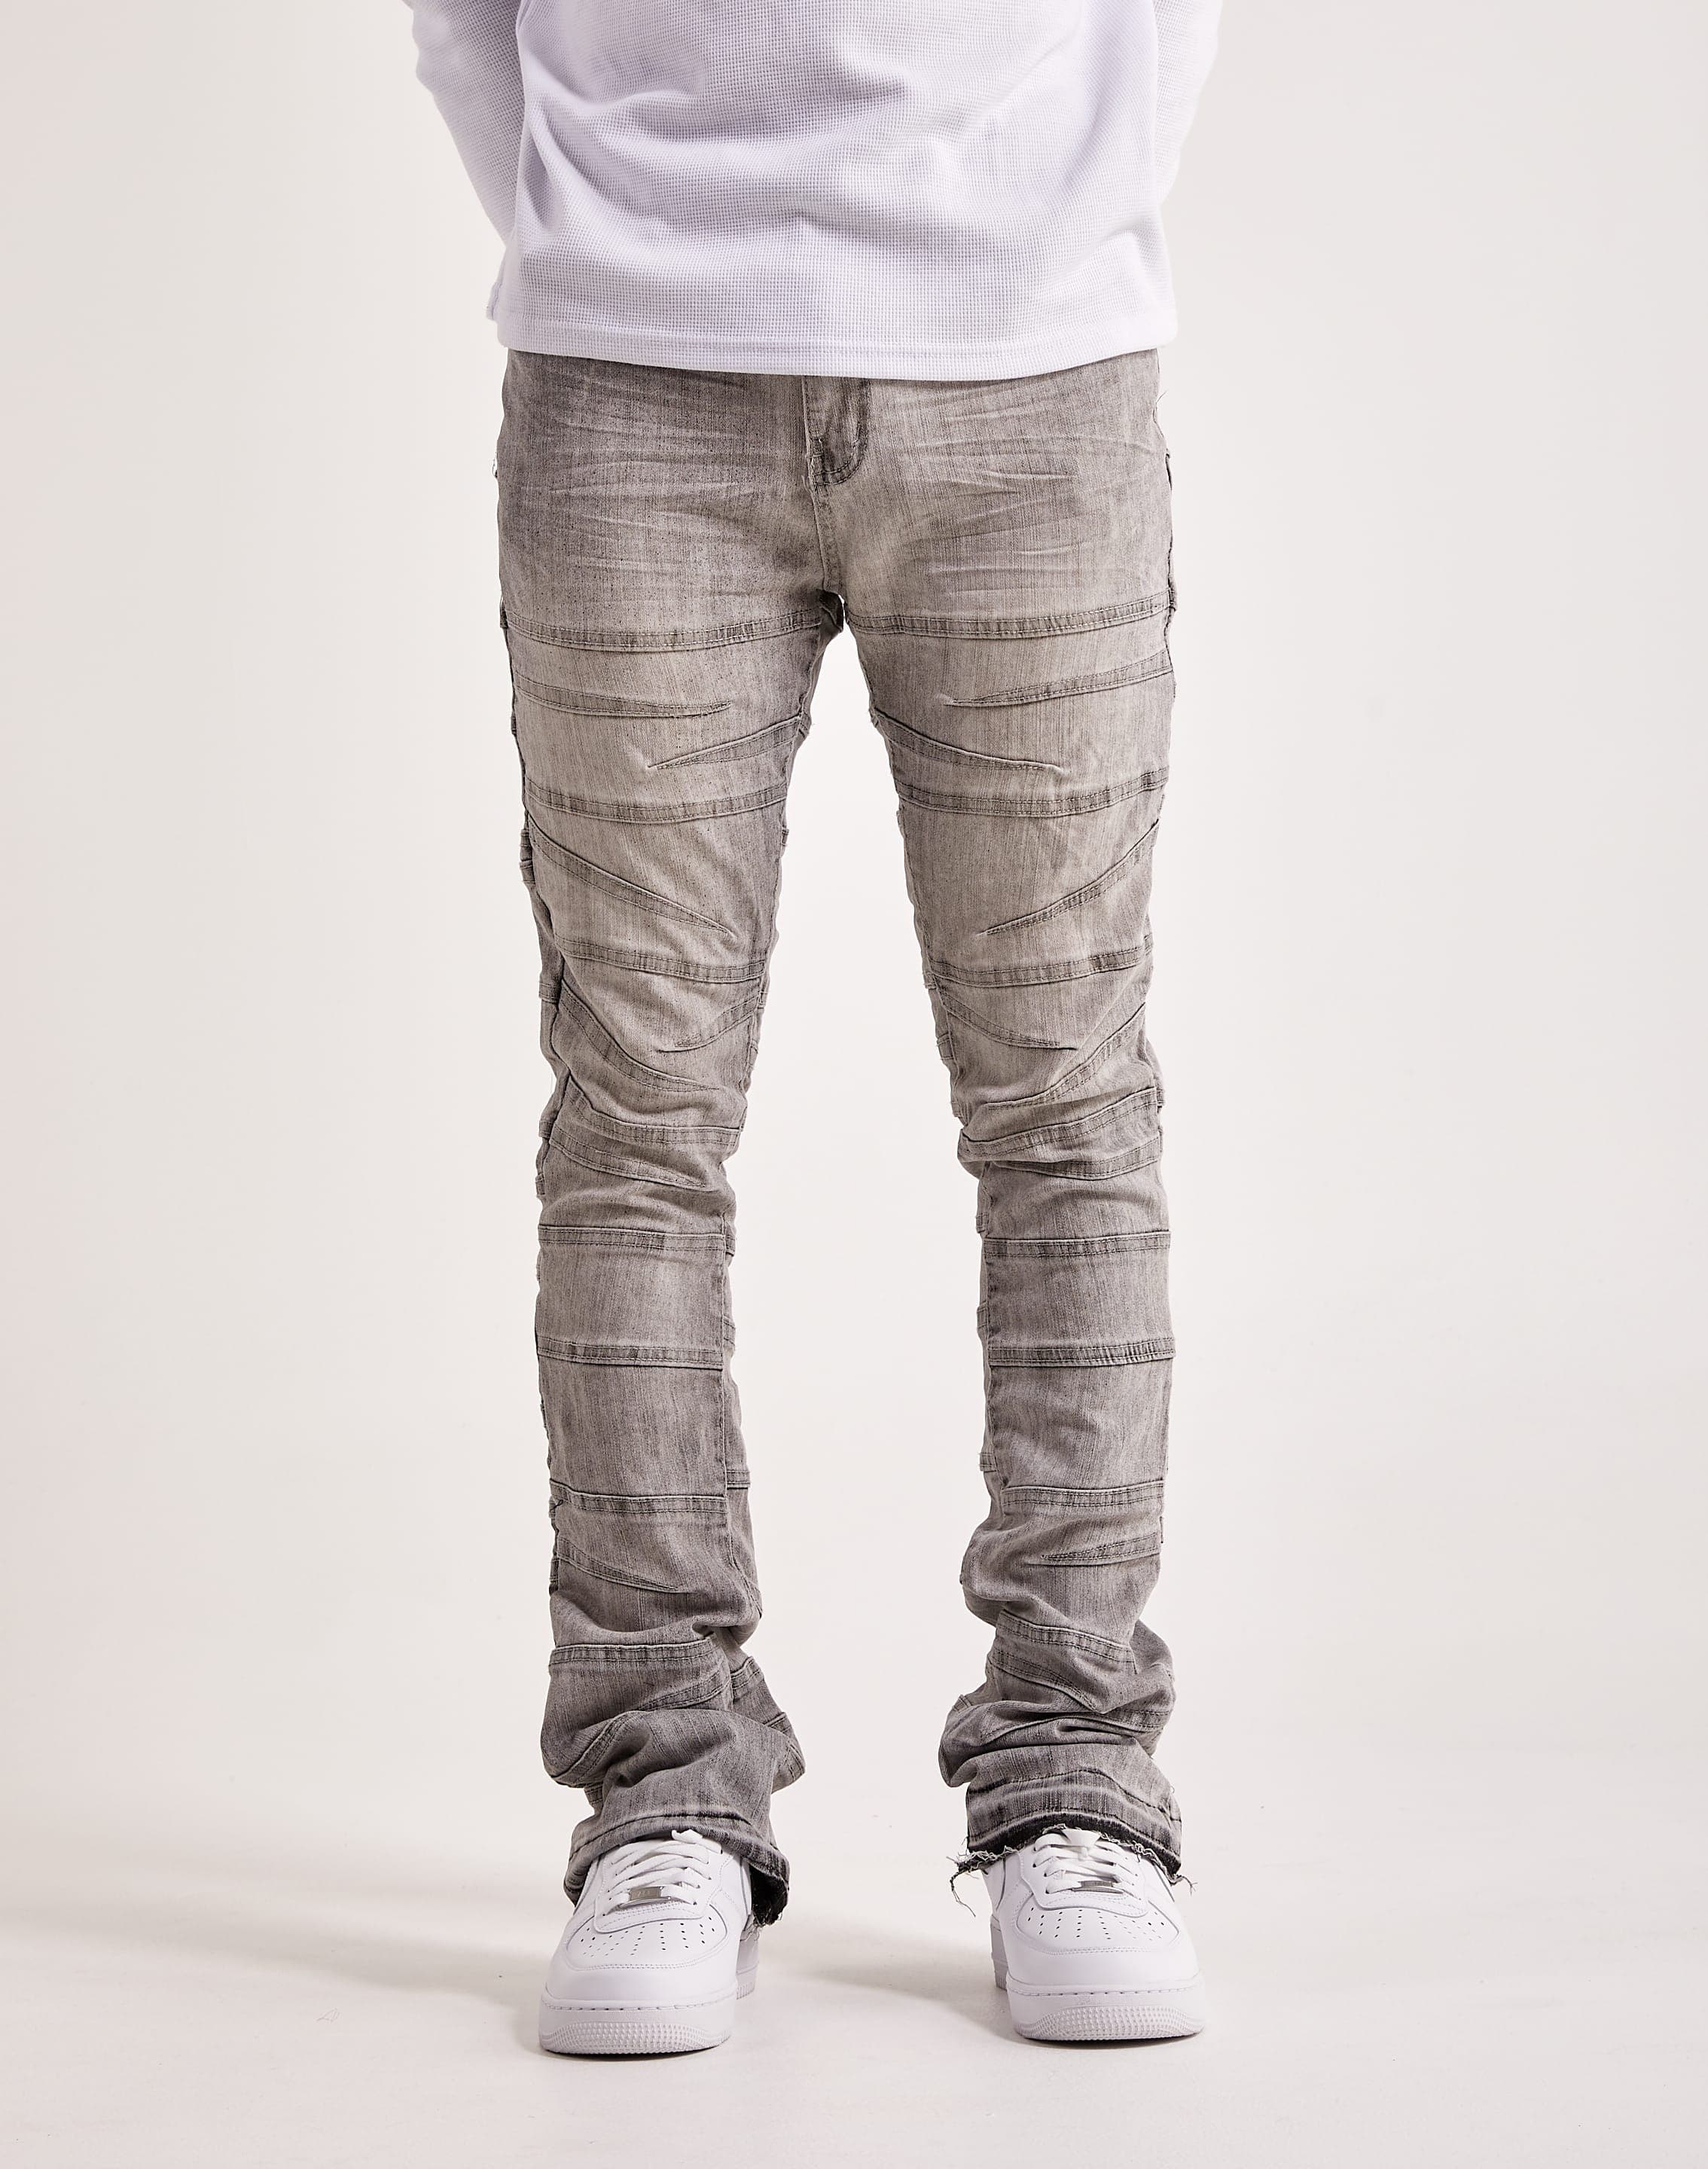 HUGO - Tapered-fit jeans in heavily distressed silver-gray denim